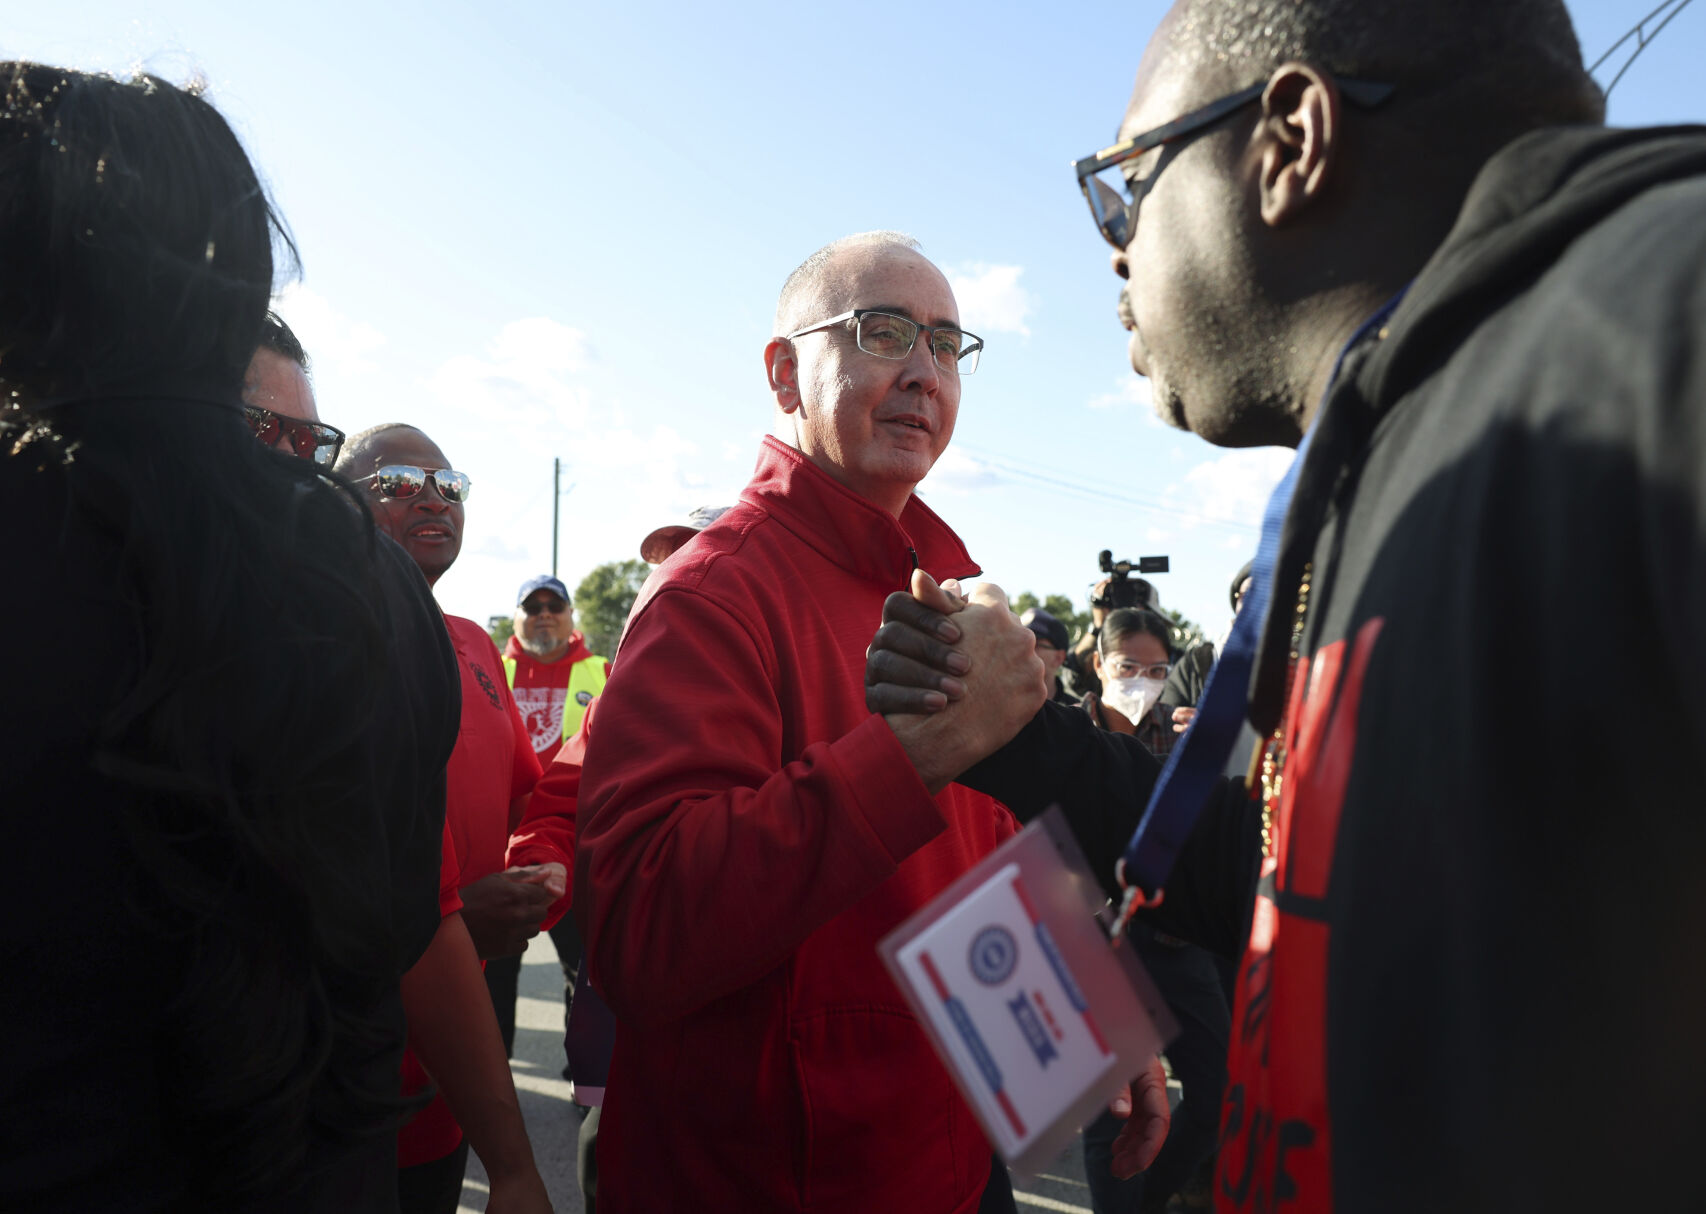 <p>File - United Auto Workers President Shawn Fain, center, visits striking UAW Local 551 workers outside a Ford assembly center on South Burley Avenue on Oct. 7, 2023, in Chicago. Throughout its 5-week-old strikes against Detroit’s automakers, the United Auto Workers union has cast an emphatically combative stance, reflecting the style of Fain, its pugnacious leader. (John J. Kim /Chicago Tribune via AP, File)</p>   PHOTO CREDIT: John J. Kim 